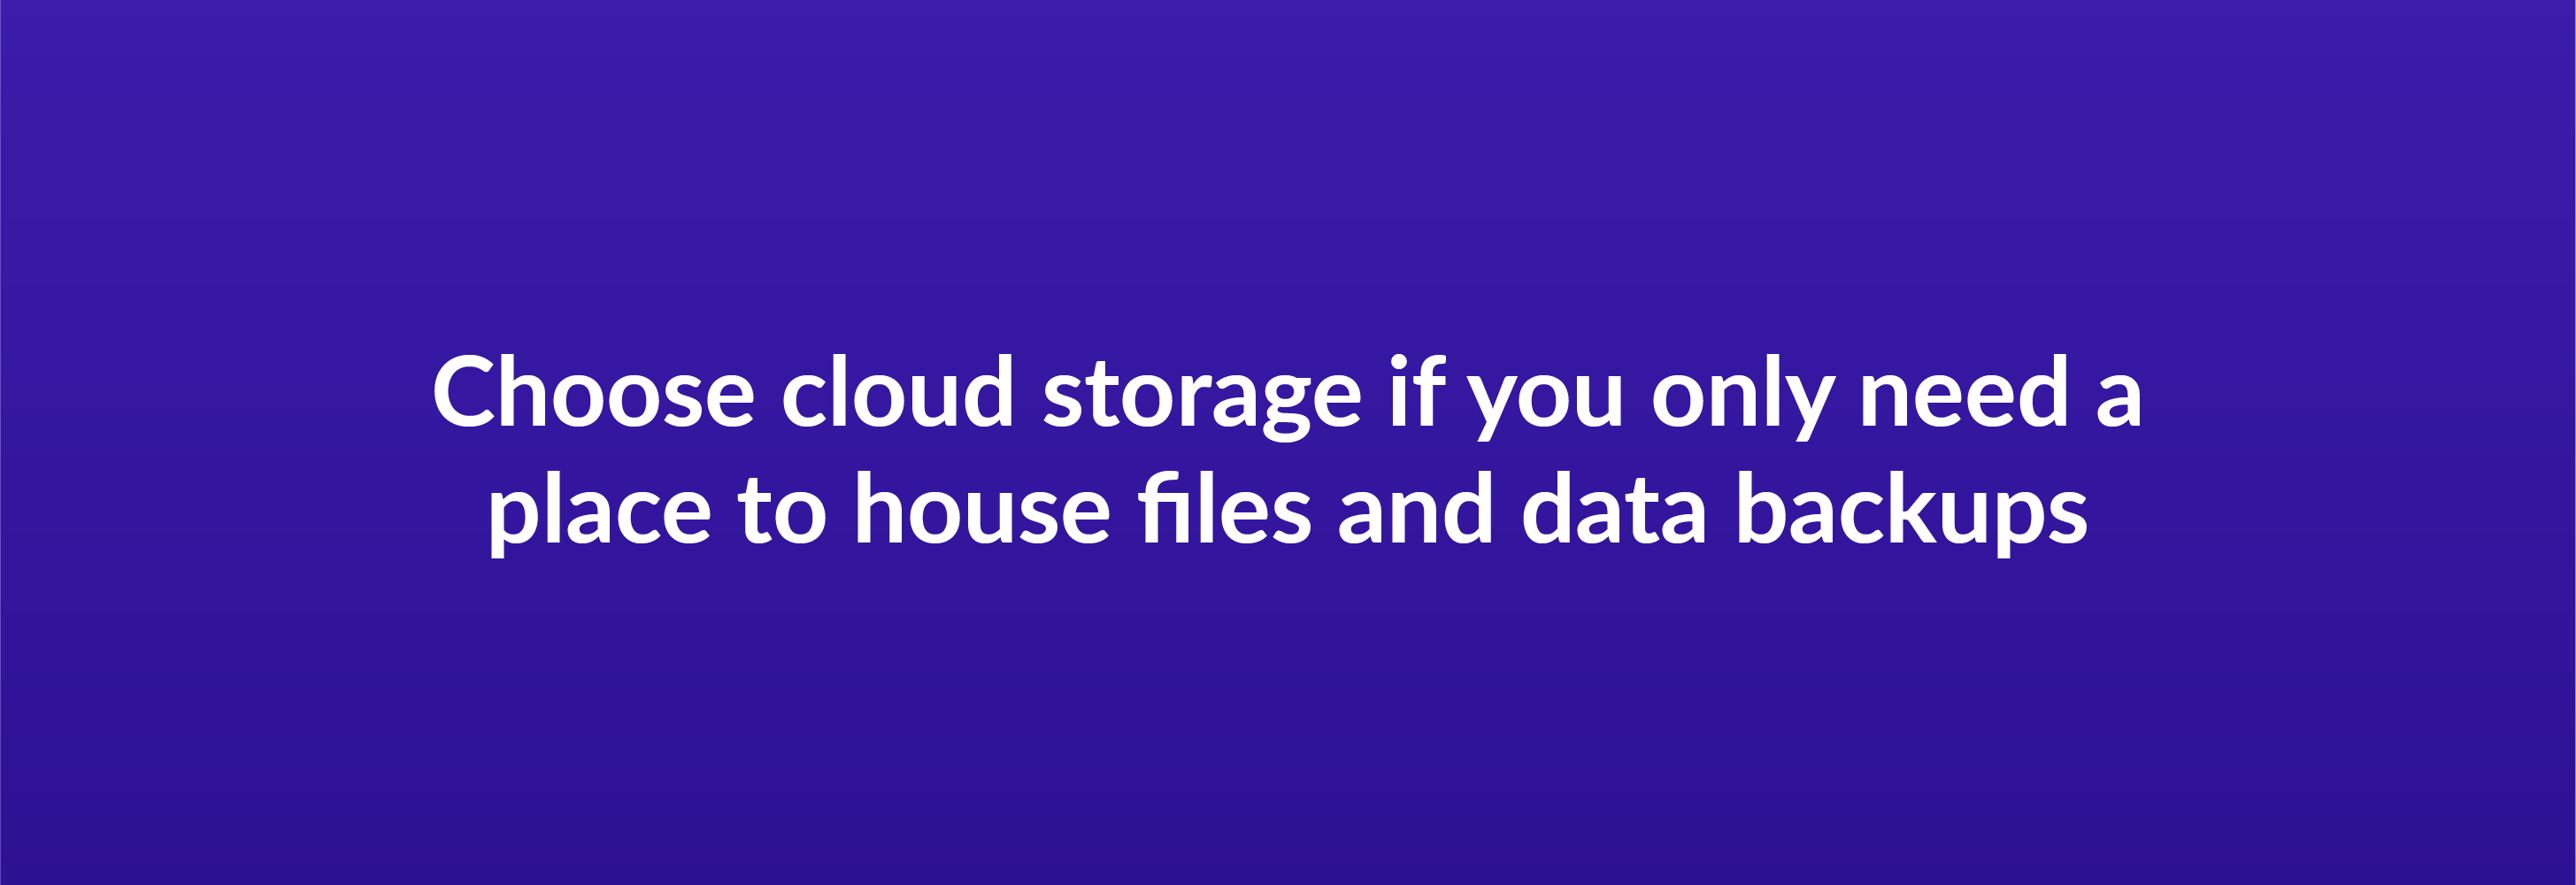 Choose cloud storage if you only need a place to house files and data backups